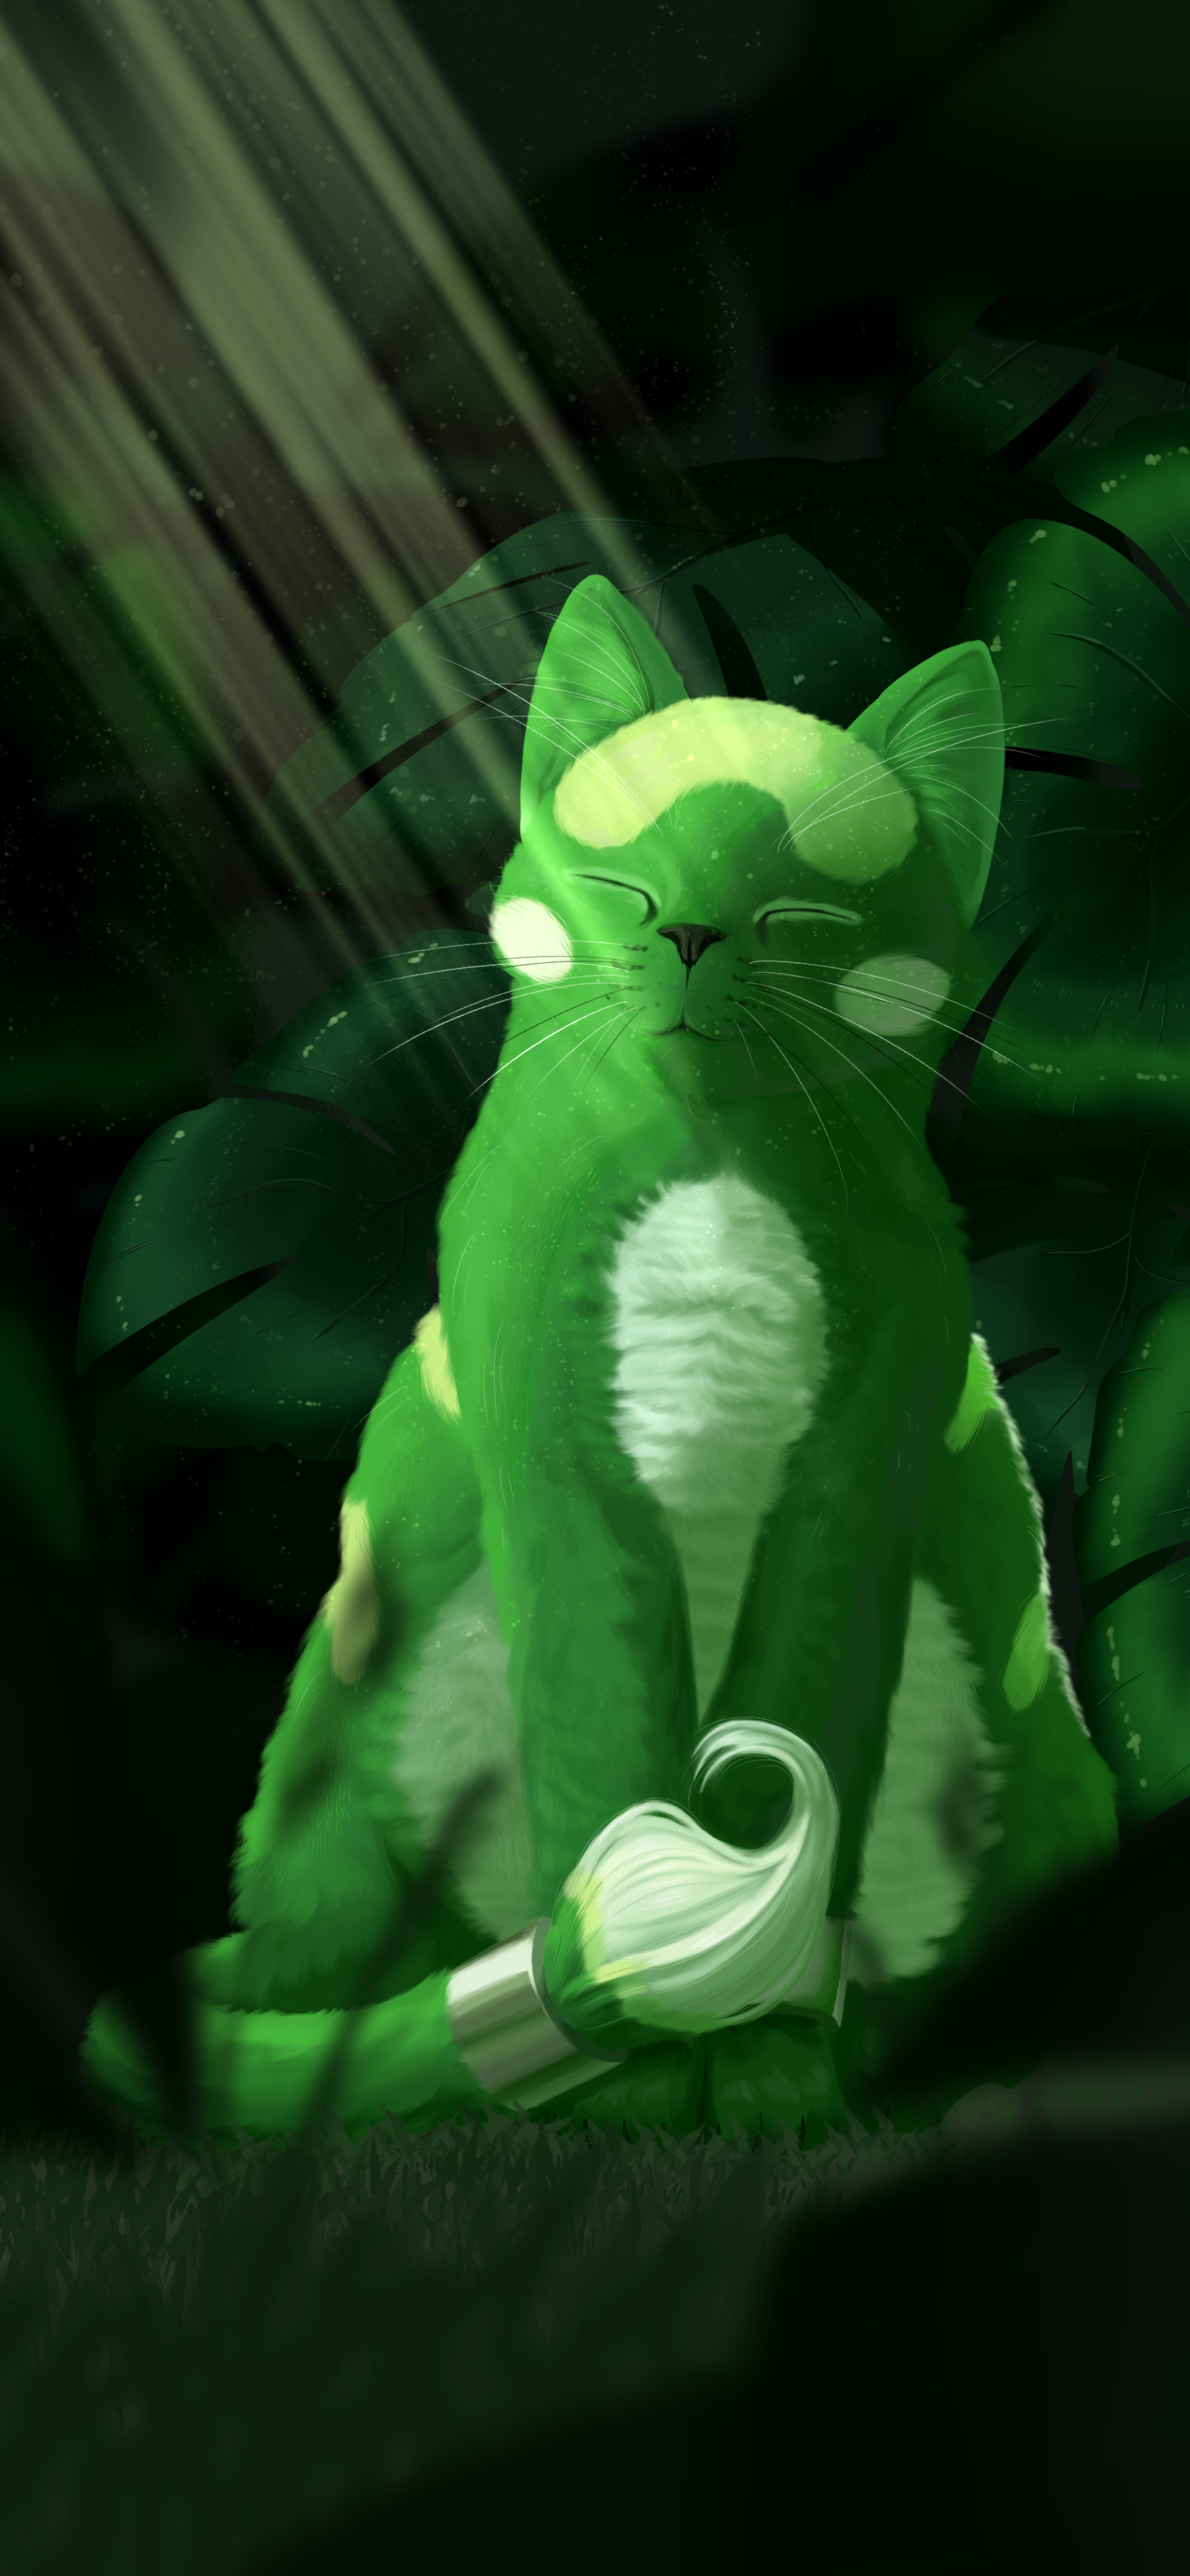 A painting of Orchynx from the video game Pokemon Uranium. He's a bright green cat with a white belly and closed eyes, and there are thick metal bands wrapped around his tail and front left paw. He's sitting in a lush green forest, and there are monstera leaves visible behind him.